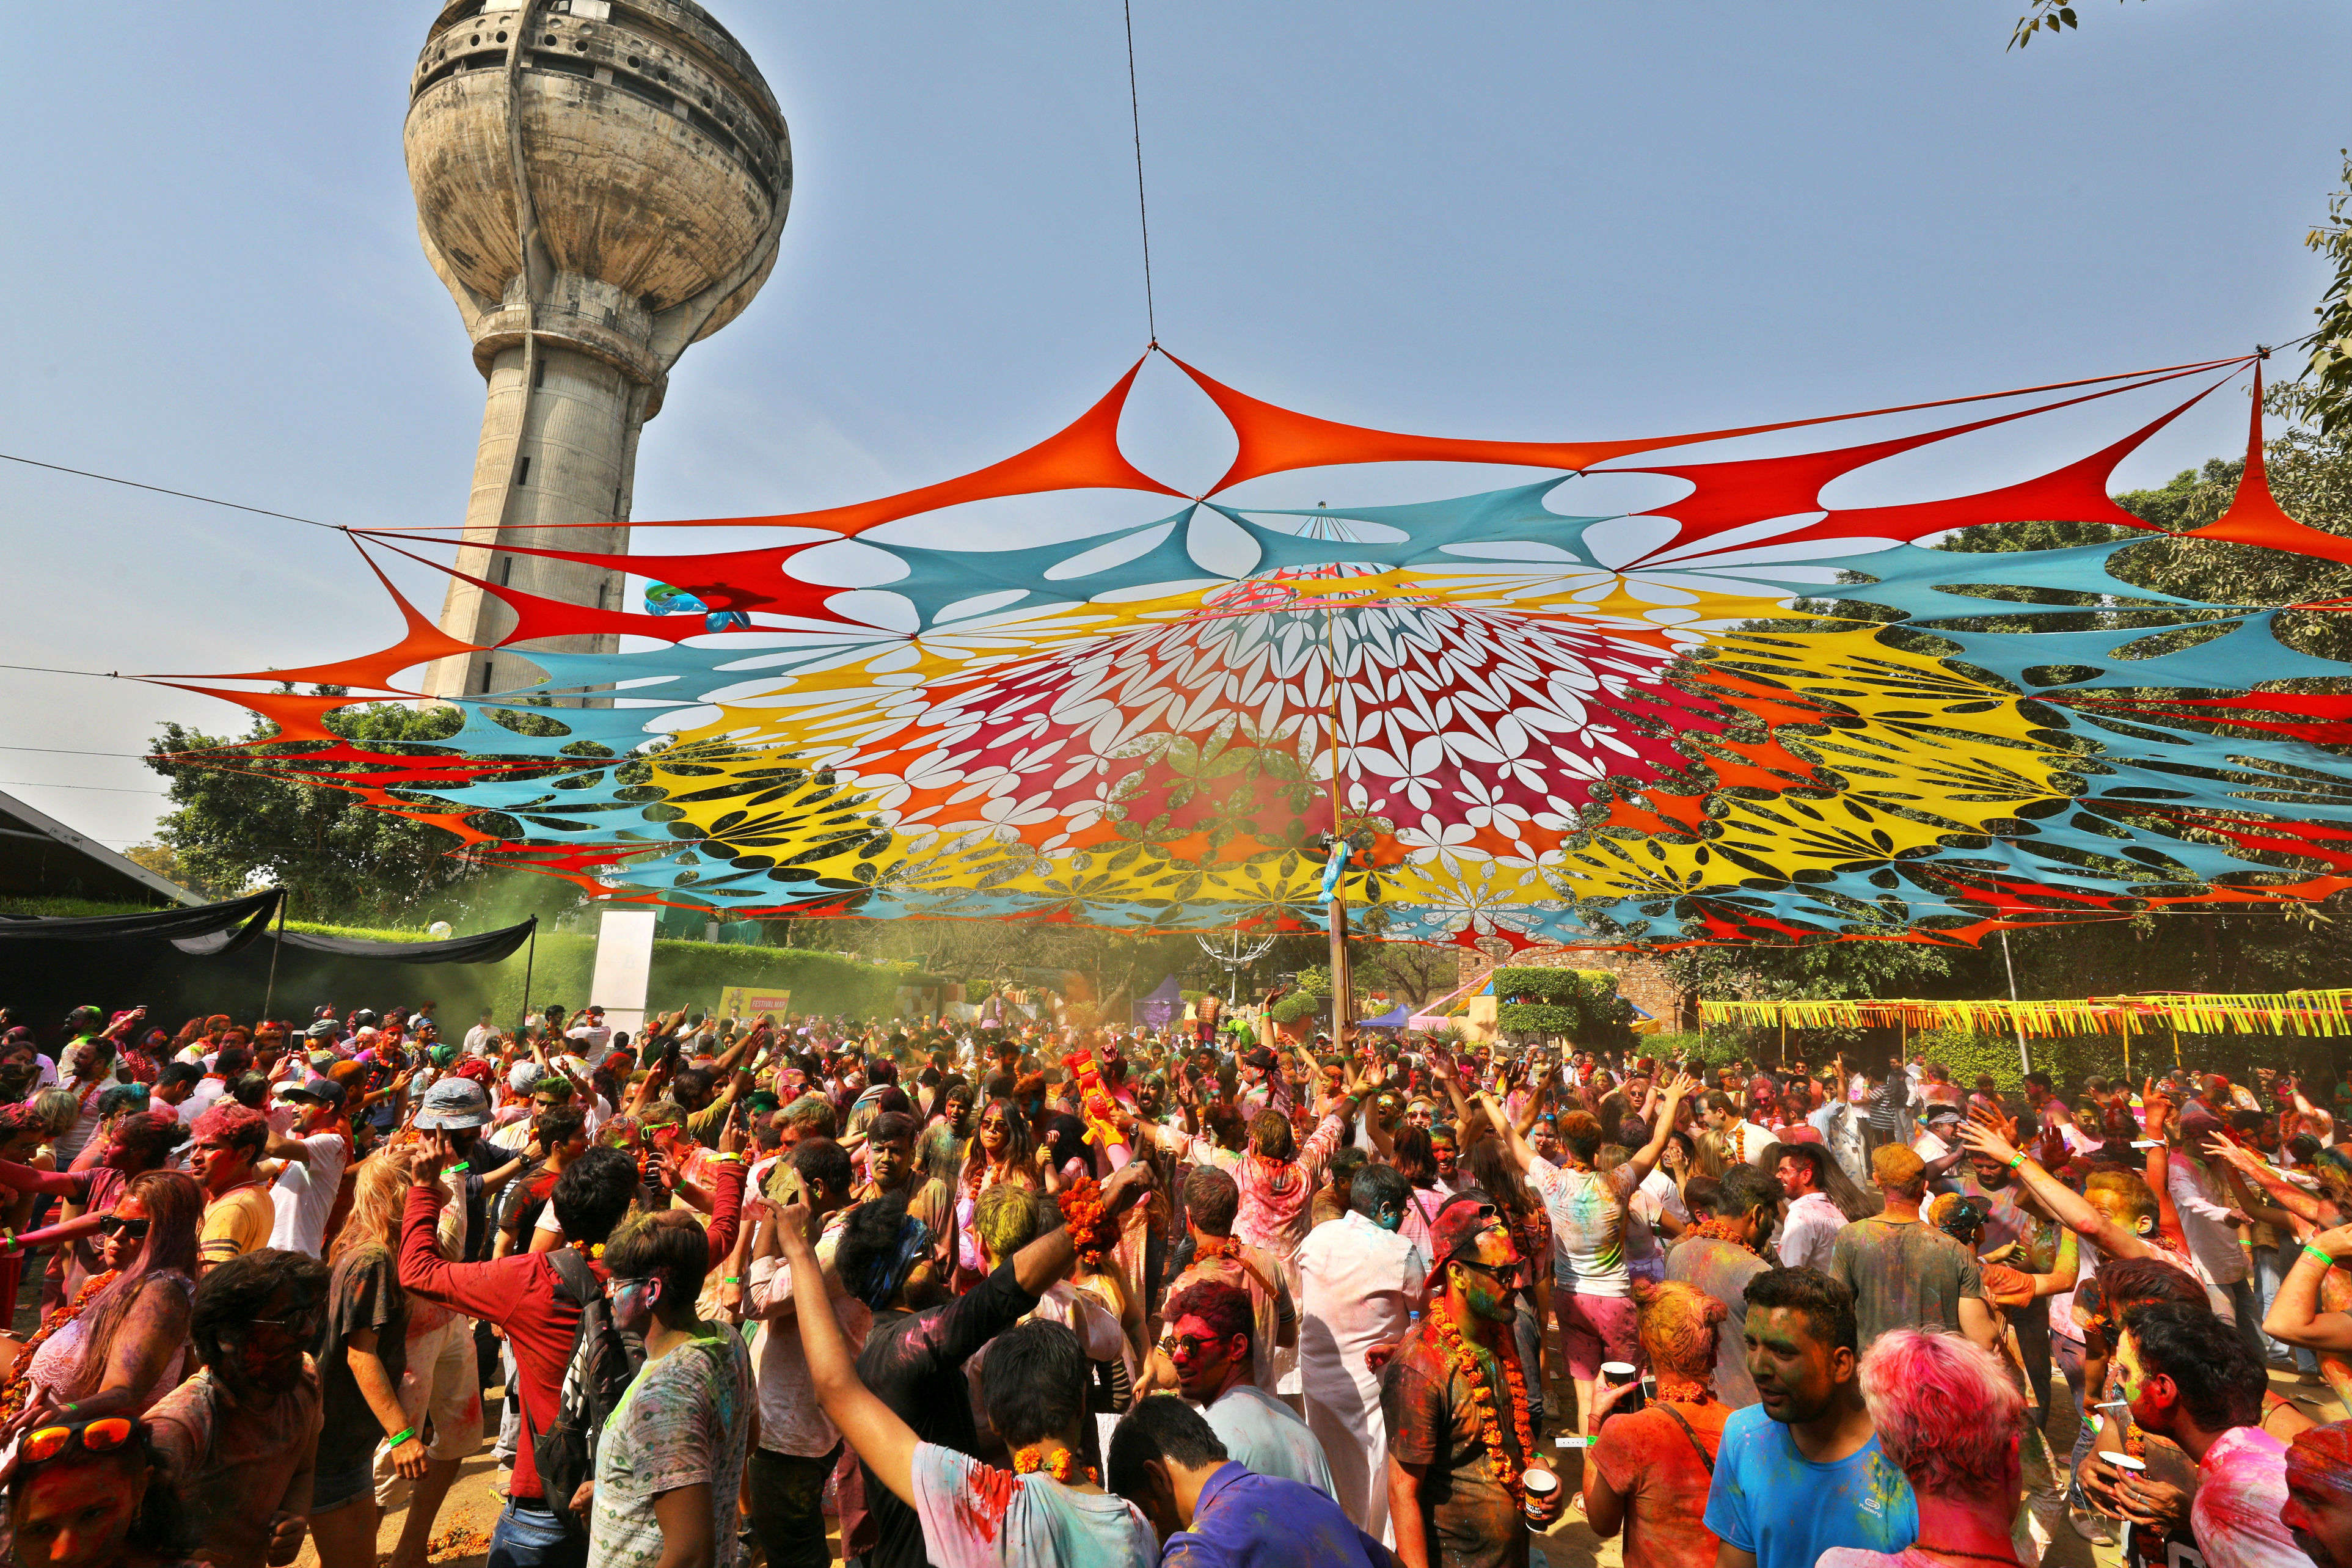 Delhi gears up for the Holi Moo! Festival this Holi Times of India Travel